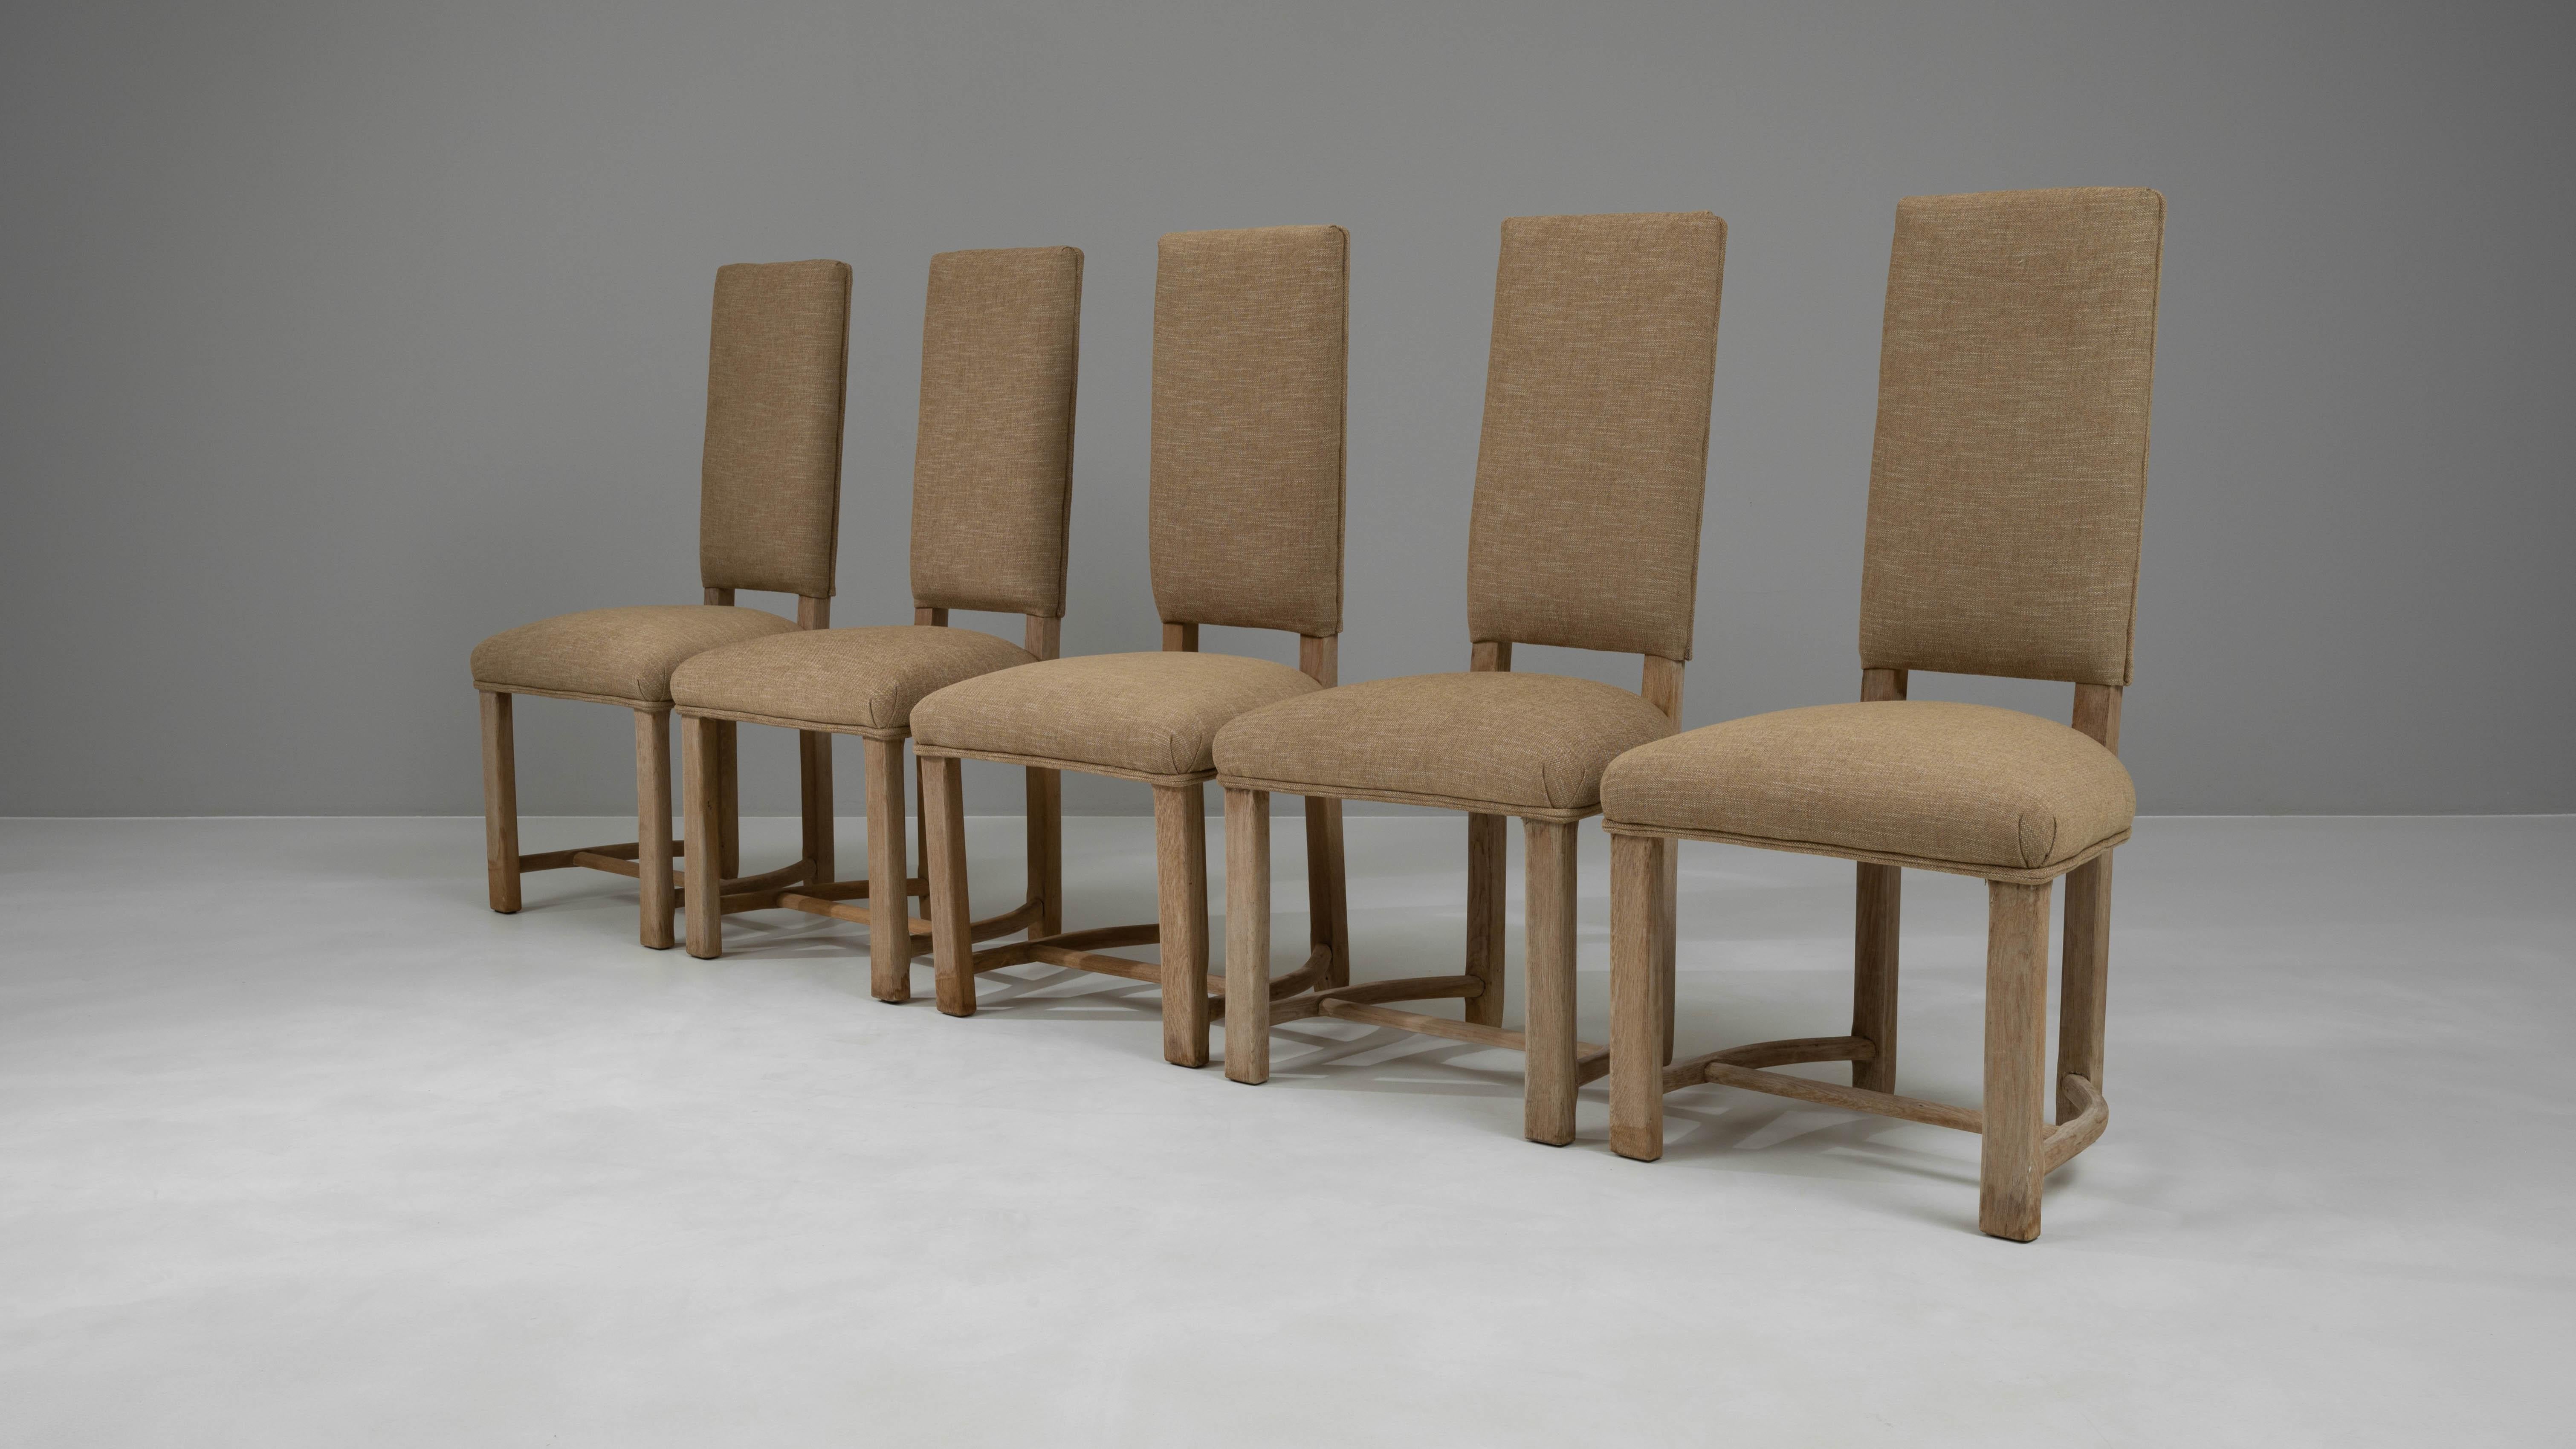 20th Century French Bleached Oak Dining Chairs With Upholstered Seats And Backs For Sale 6